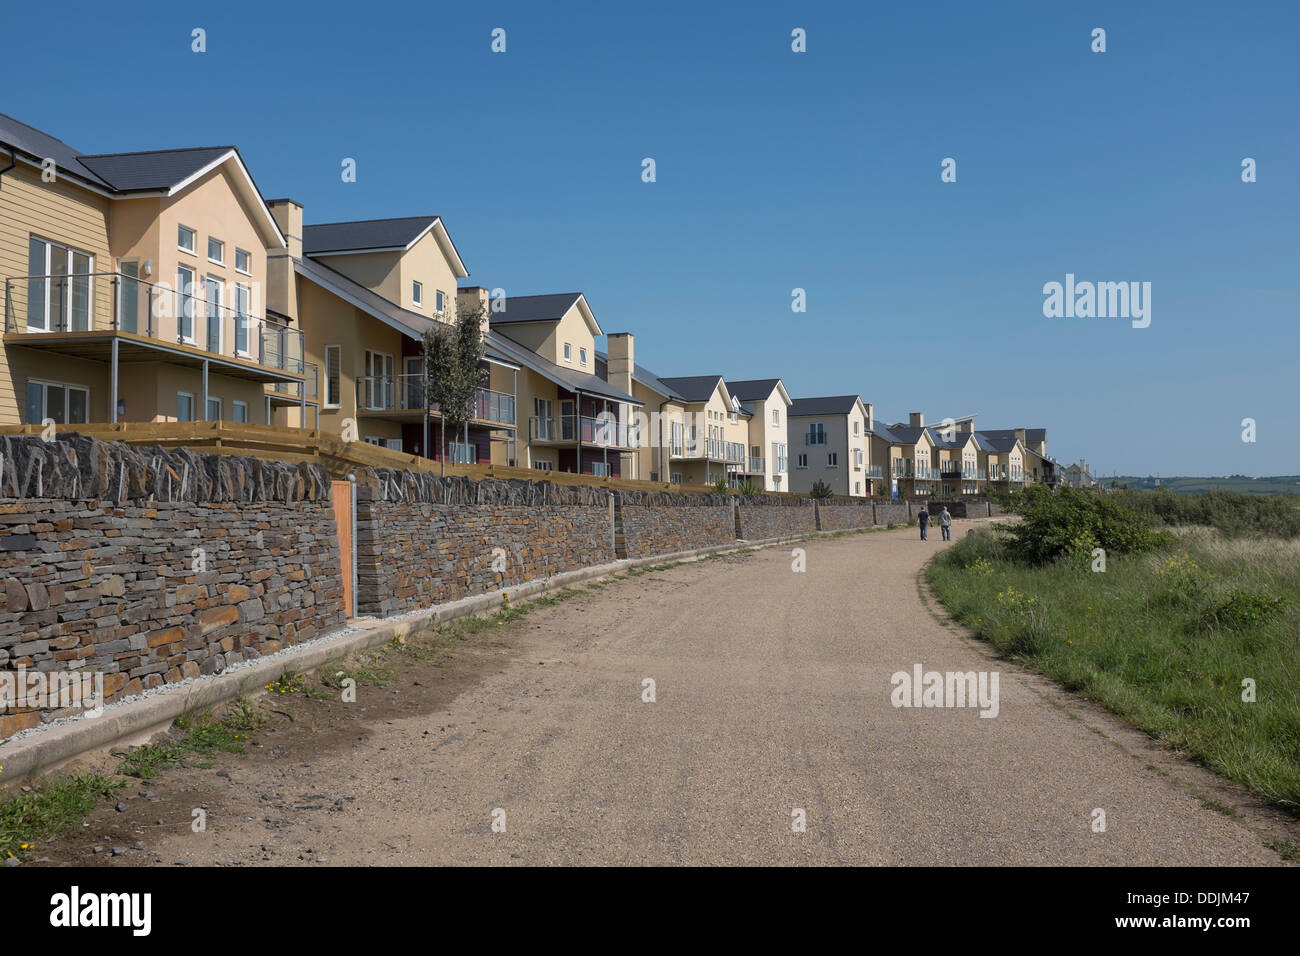 A private development of new detached 'executive' beachfront seaside houses, Llanelli, Carmarthenshire Wales UK Stock Photo